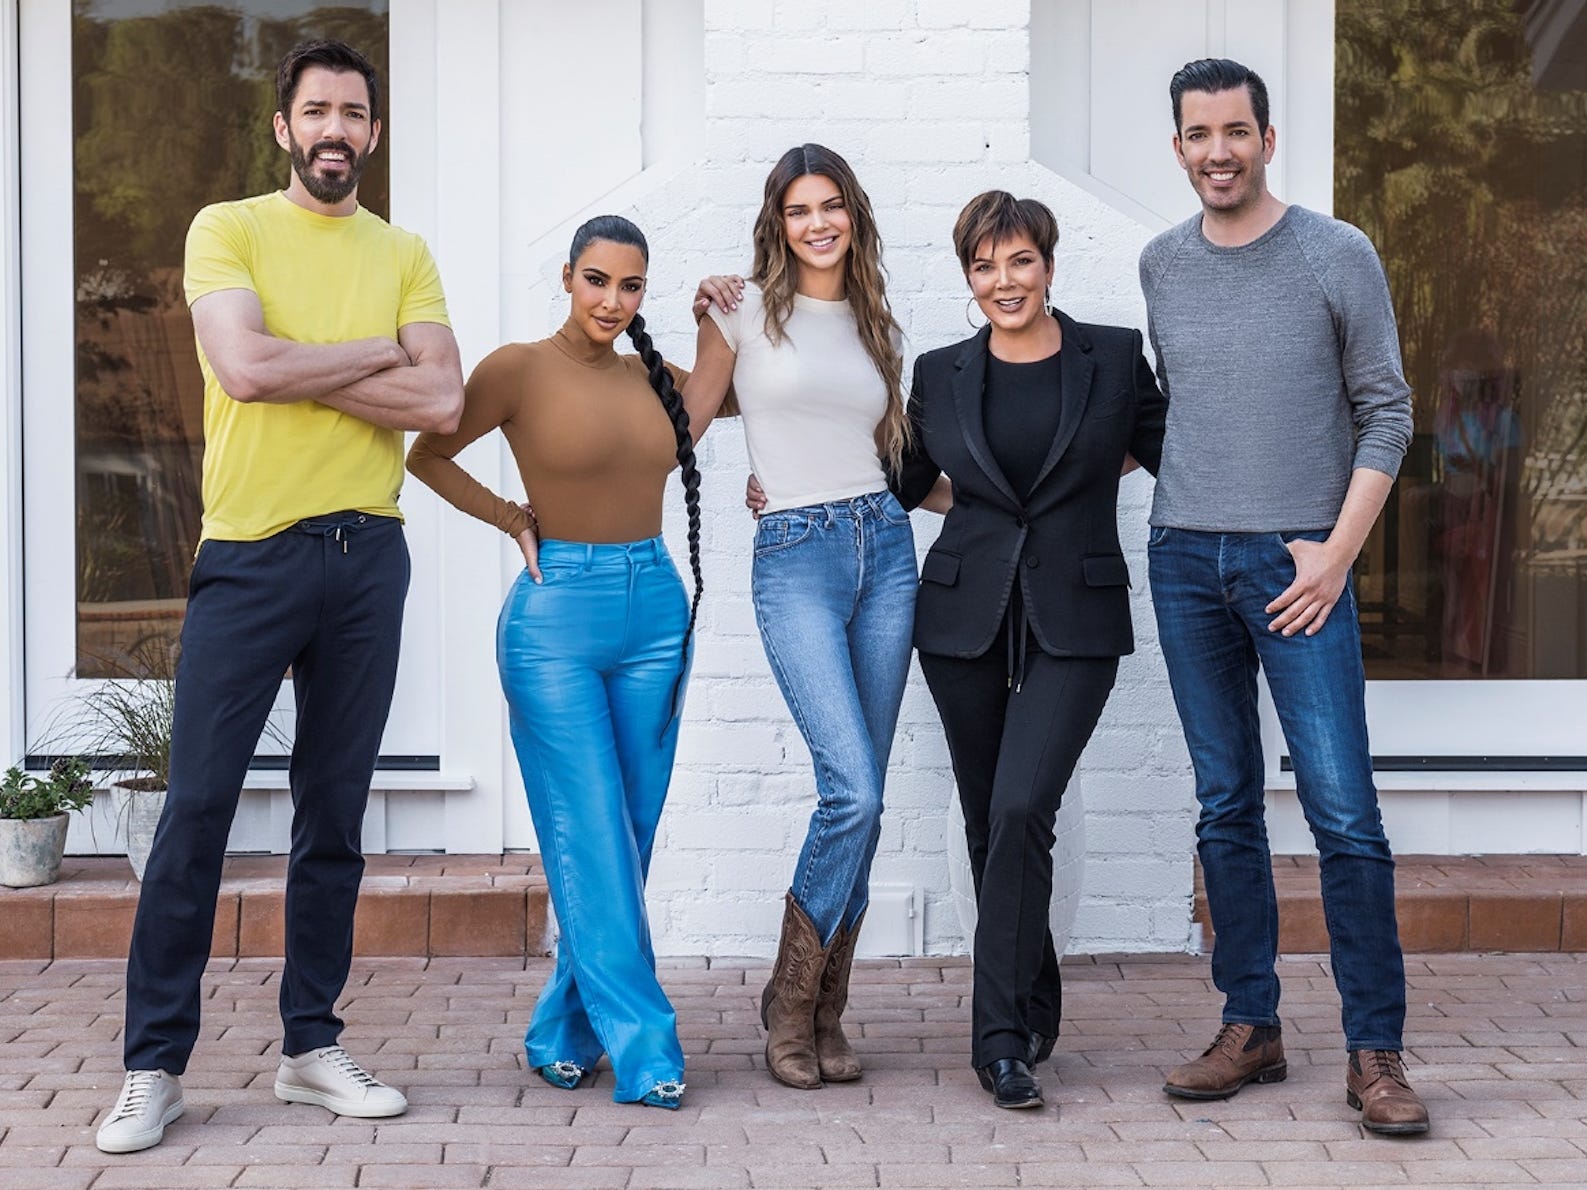 Drew Scott, Kim Kardashian West, Kendall Jenner, Kris Jenner, and Jonathan Scott pose with their arms around each other.